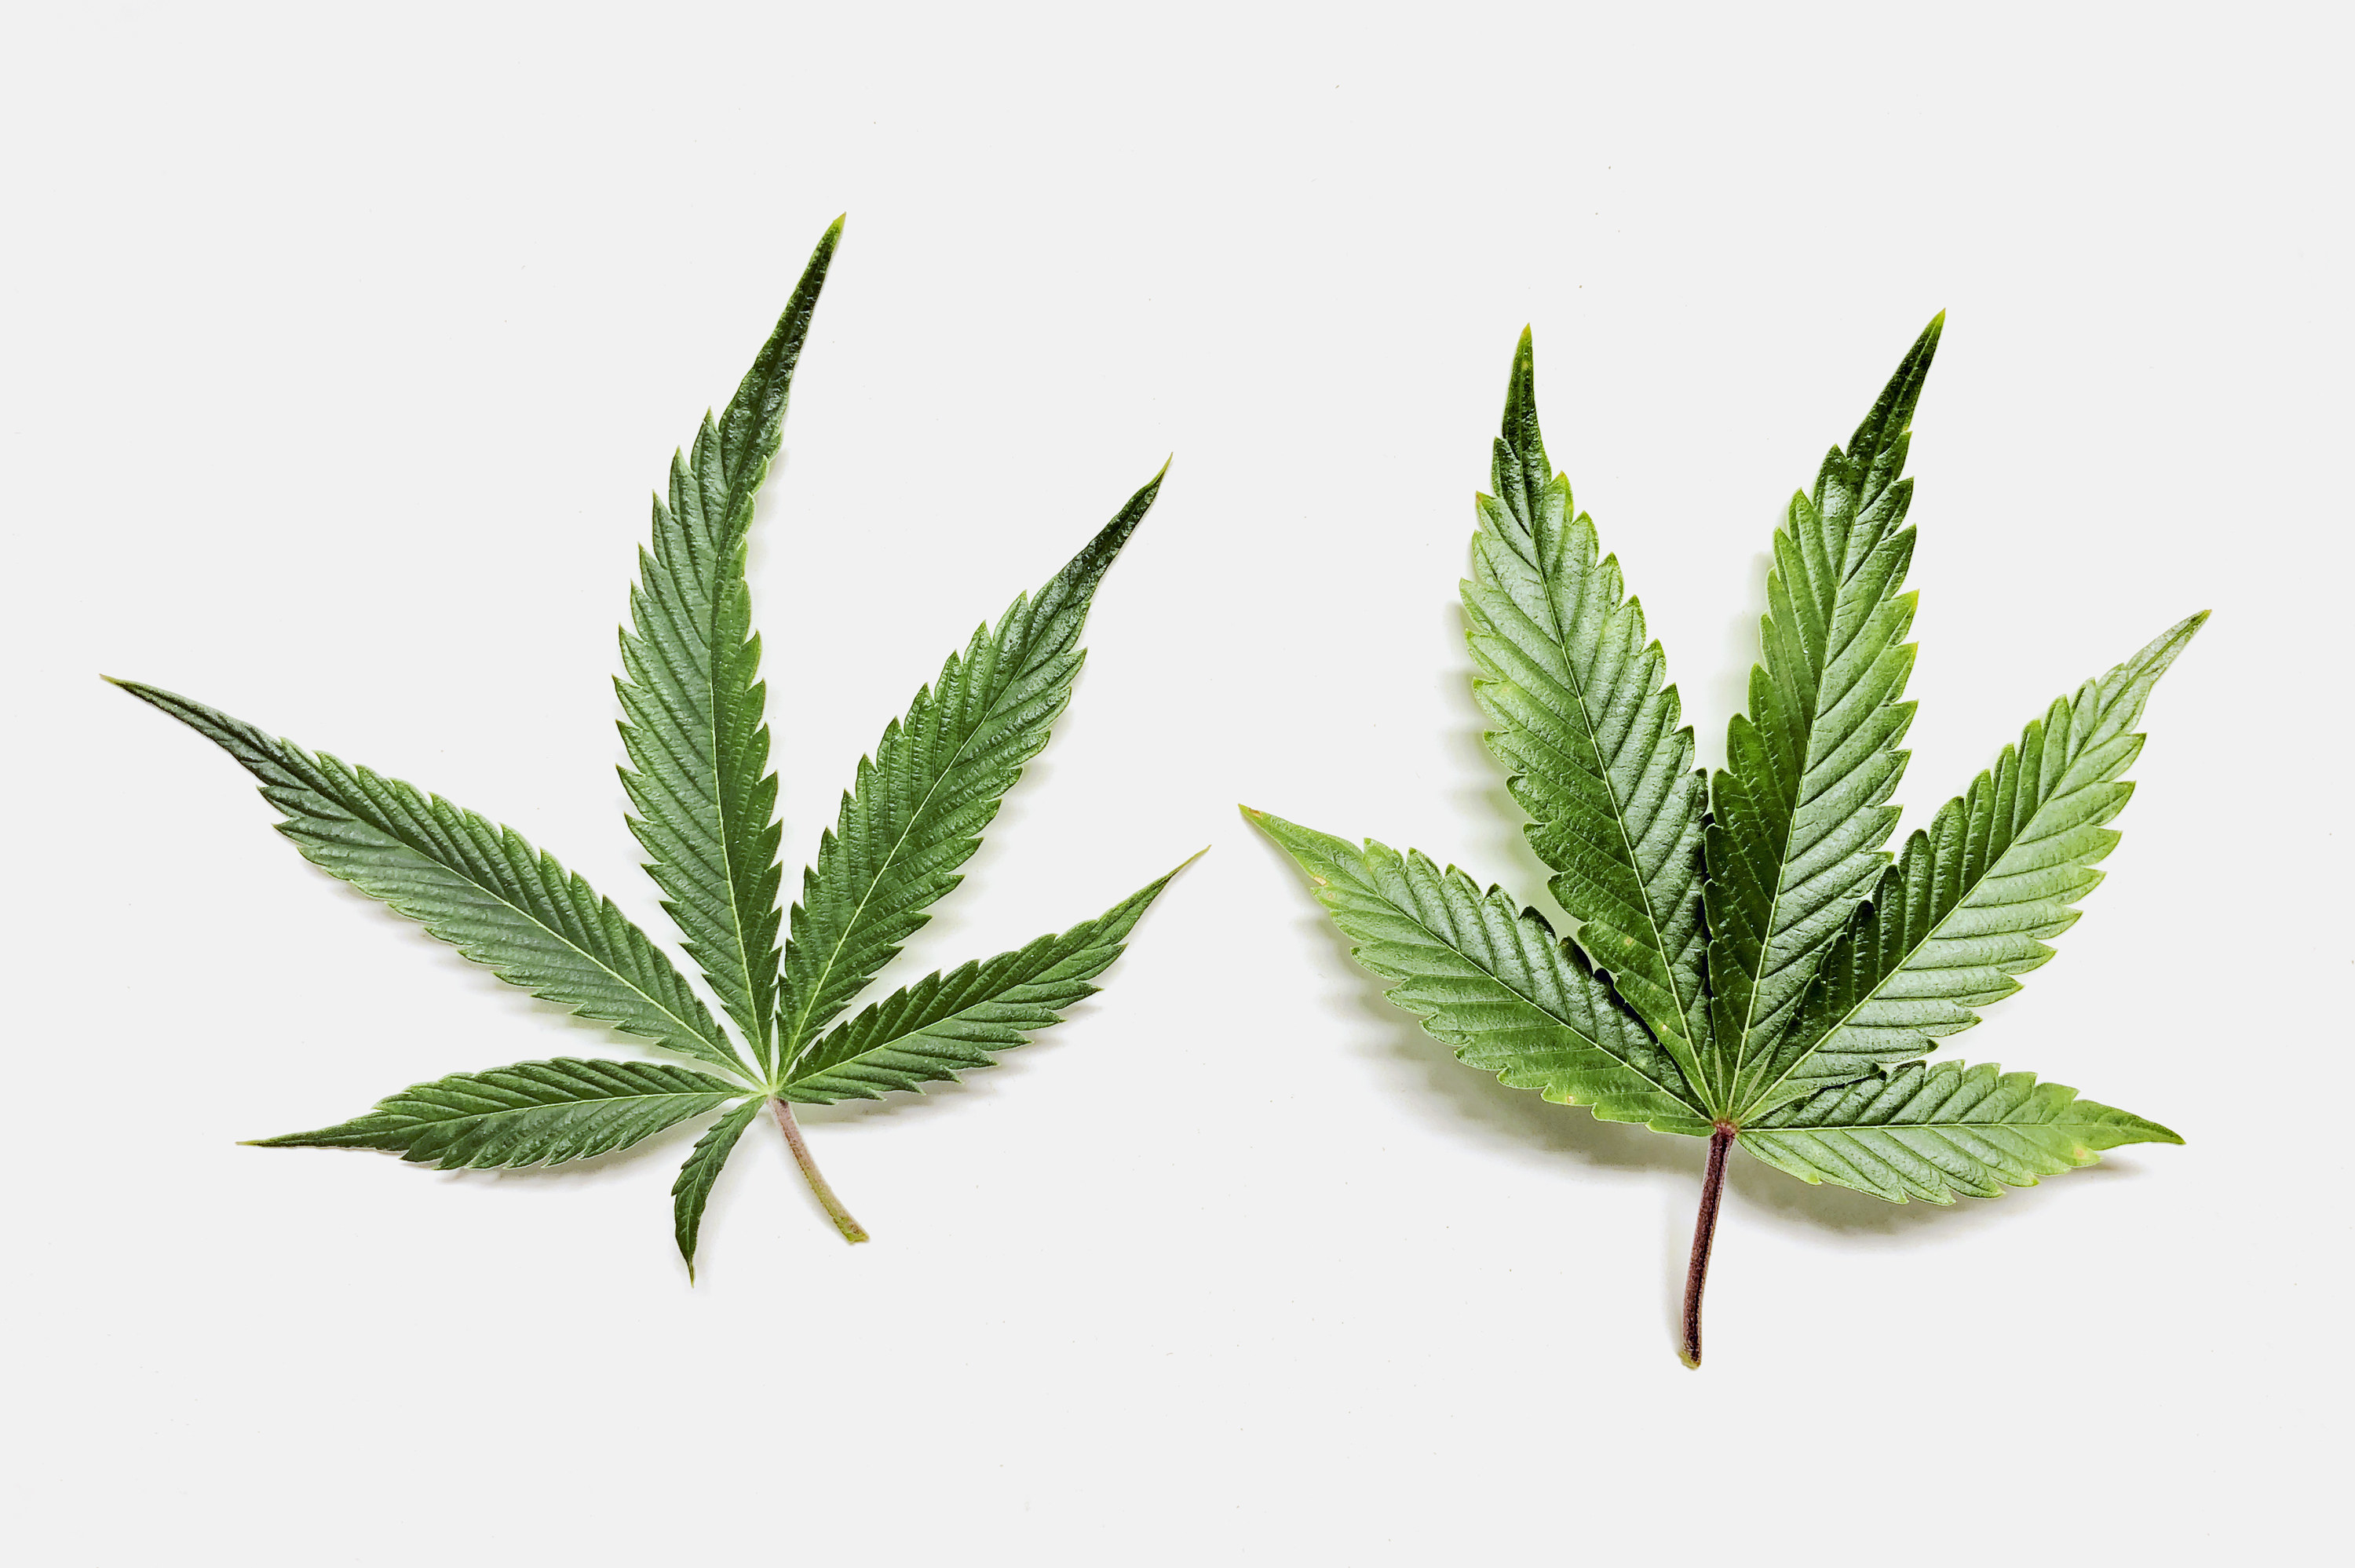 An image of marijuana leaves on a white background